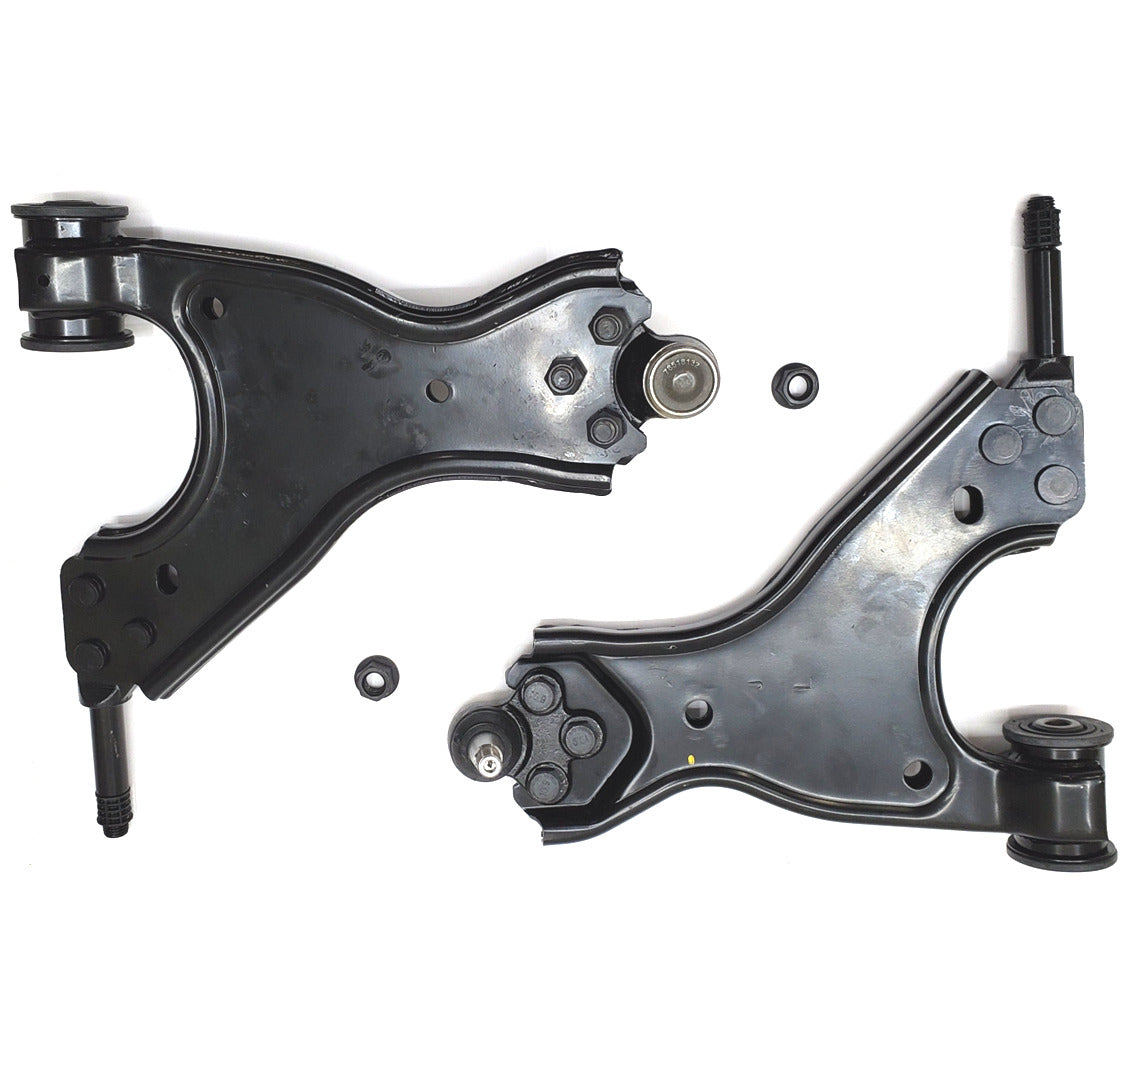 HD Control Arm Ball Joint Suspension Kit for 2007-2010 Saturn Outlook 2WD, AWD